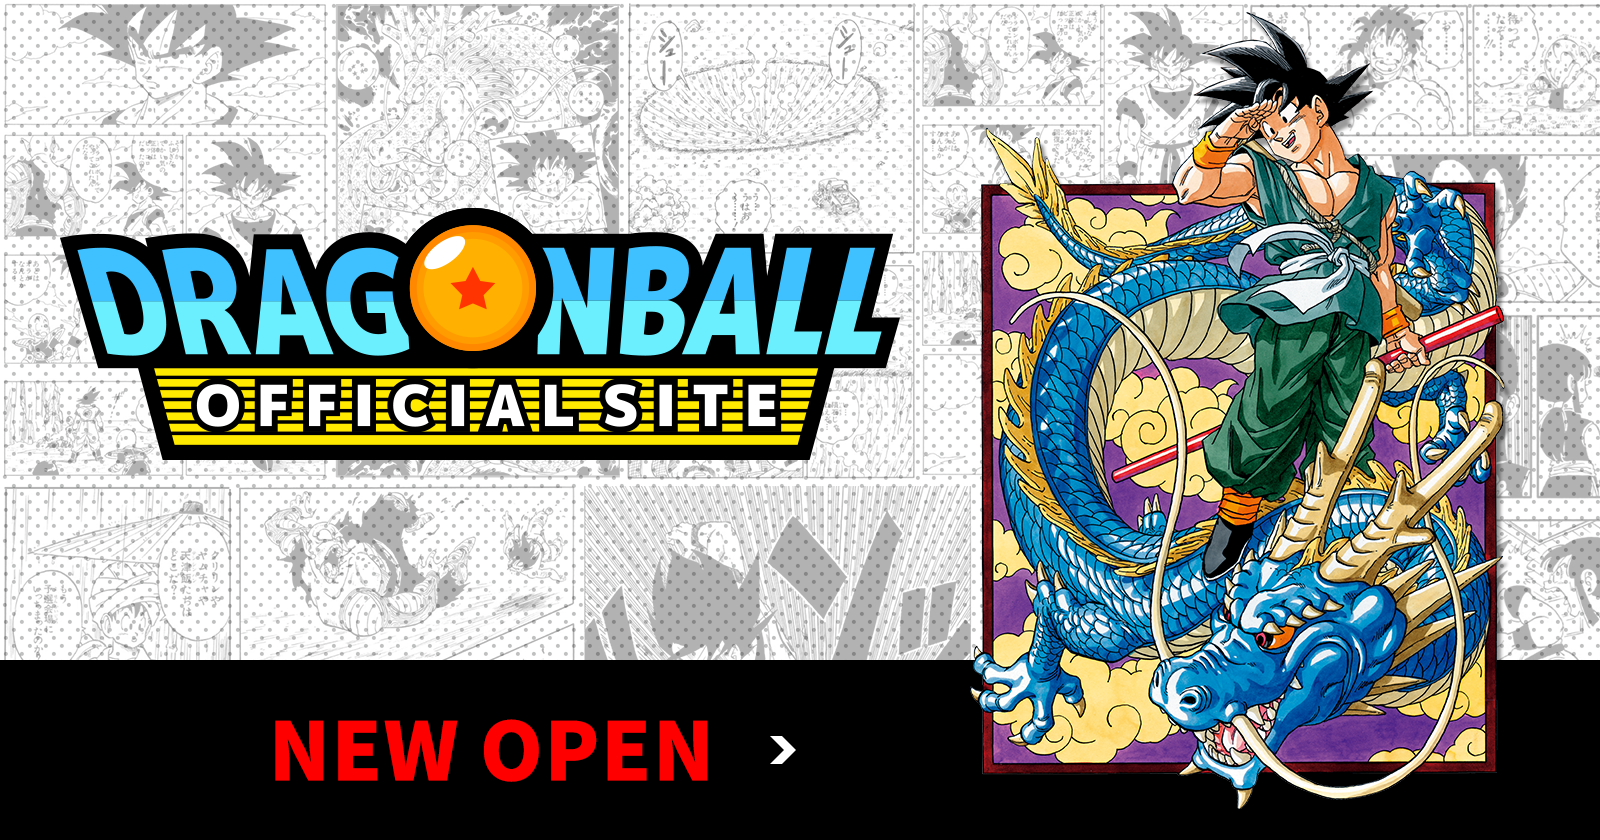 Dragon Ball official site has been reopened!